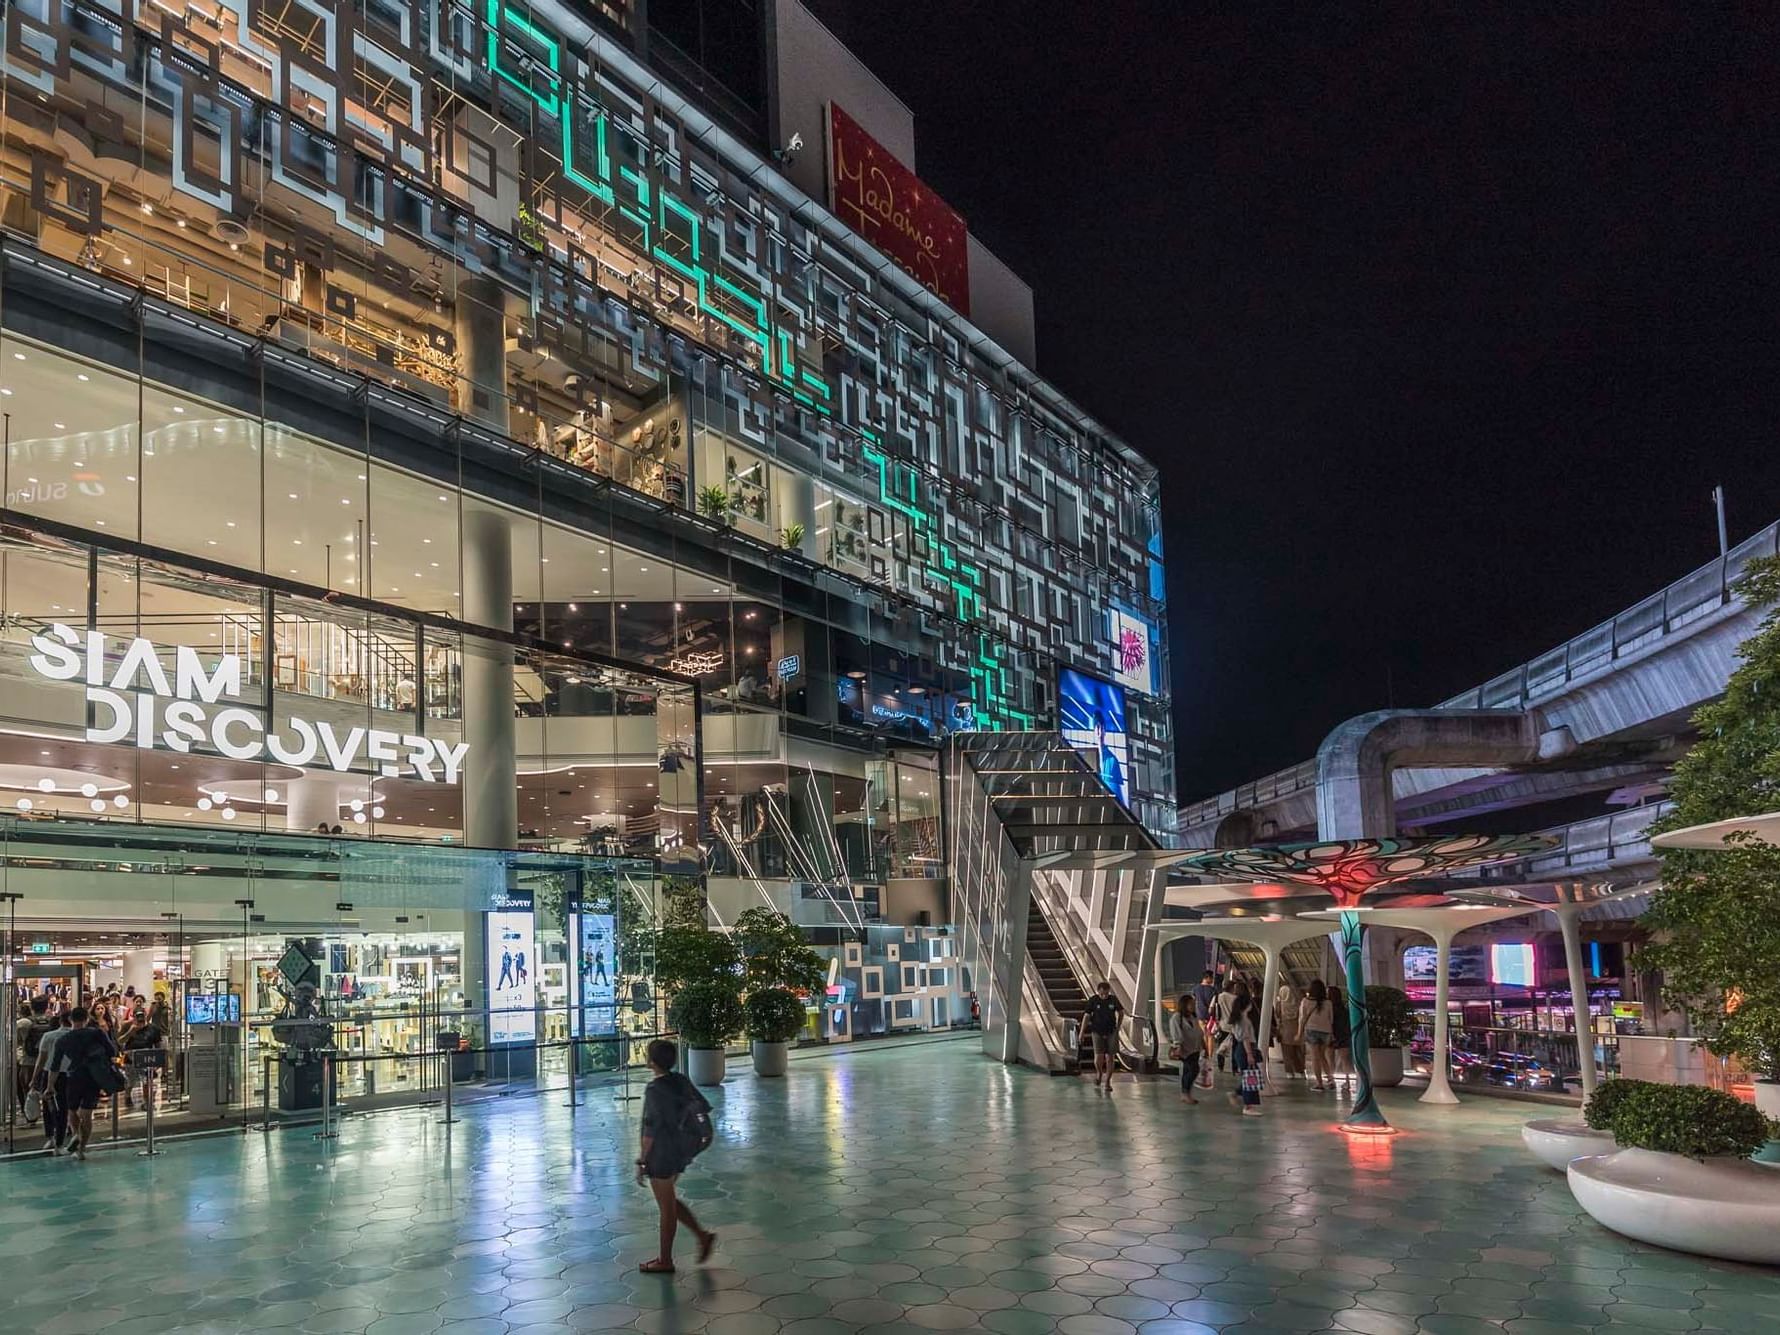 Siam Discovery is one of the most unique malls near Emporium Suites by Chatrium 